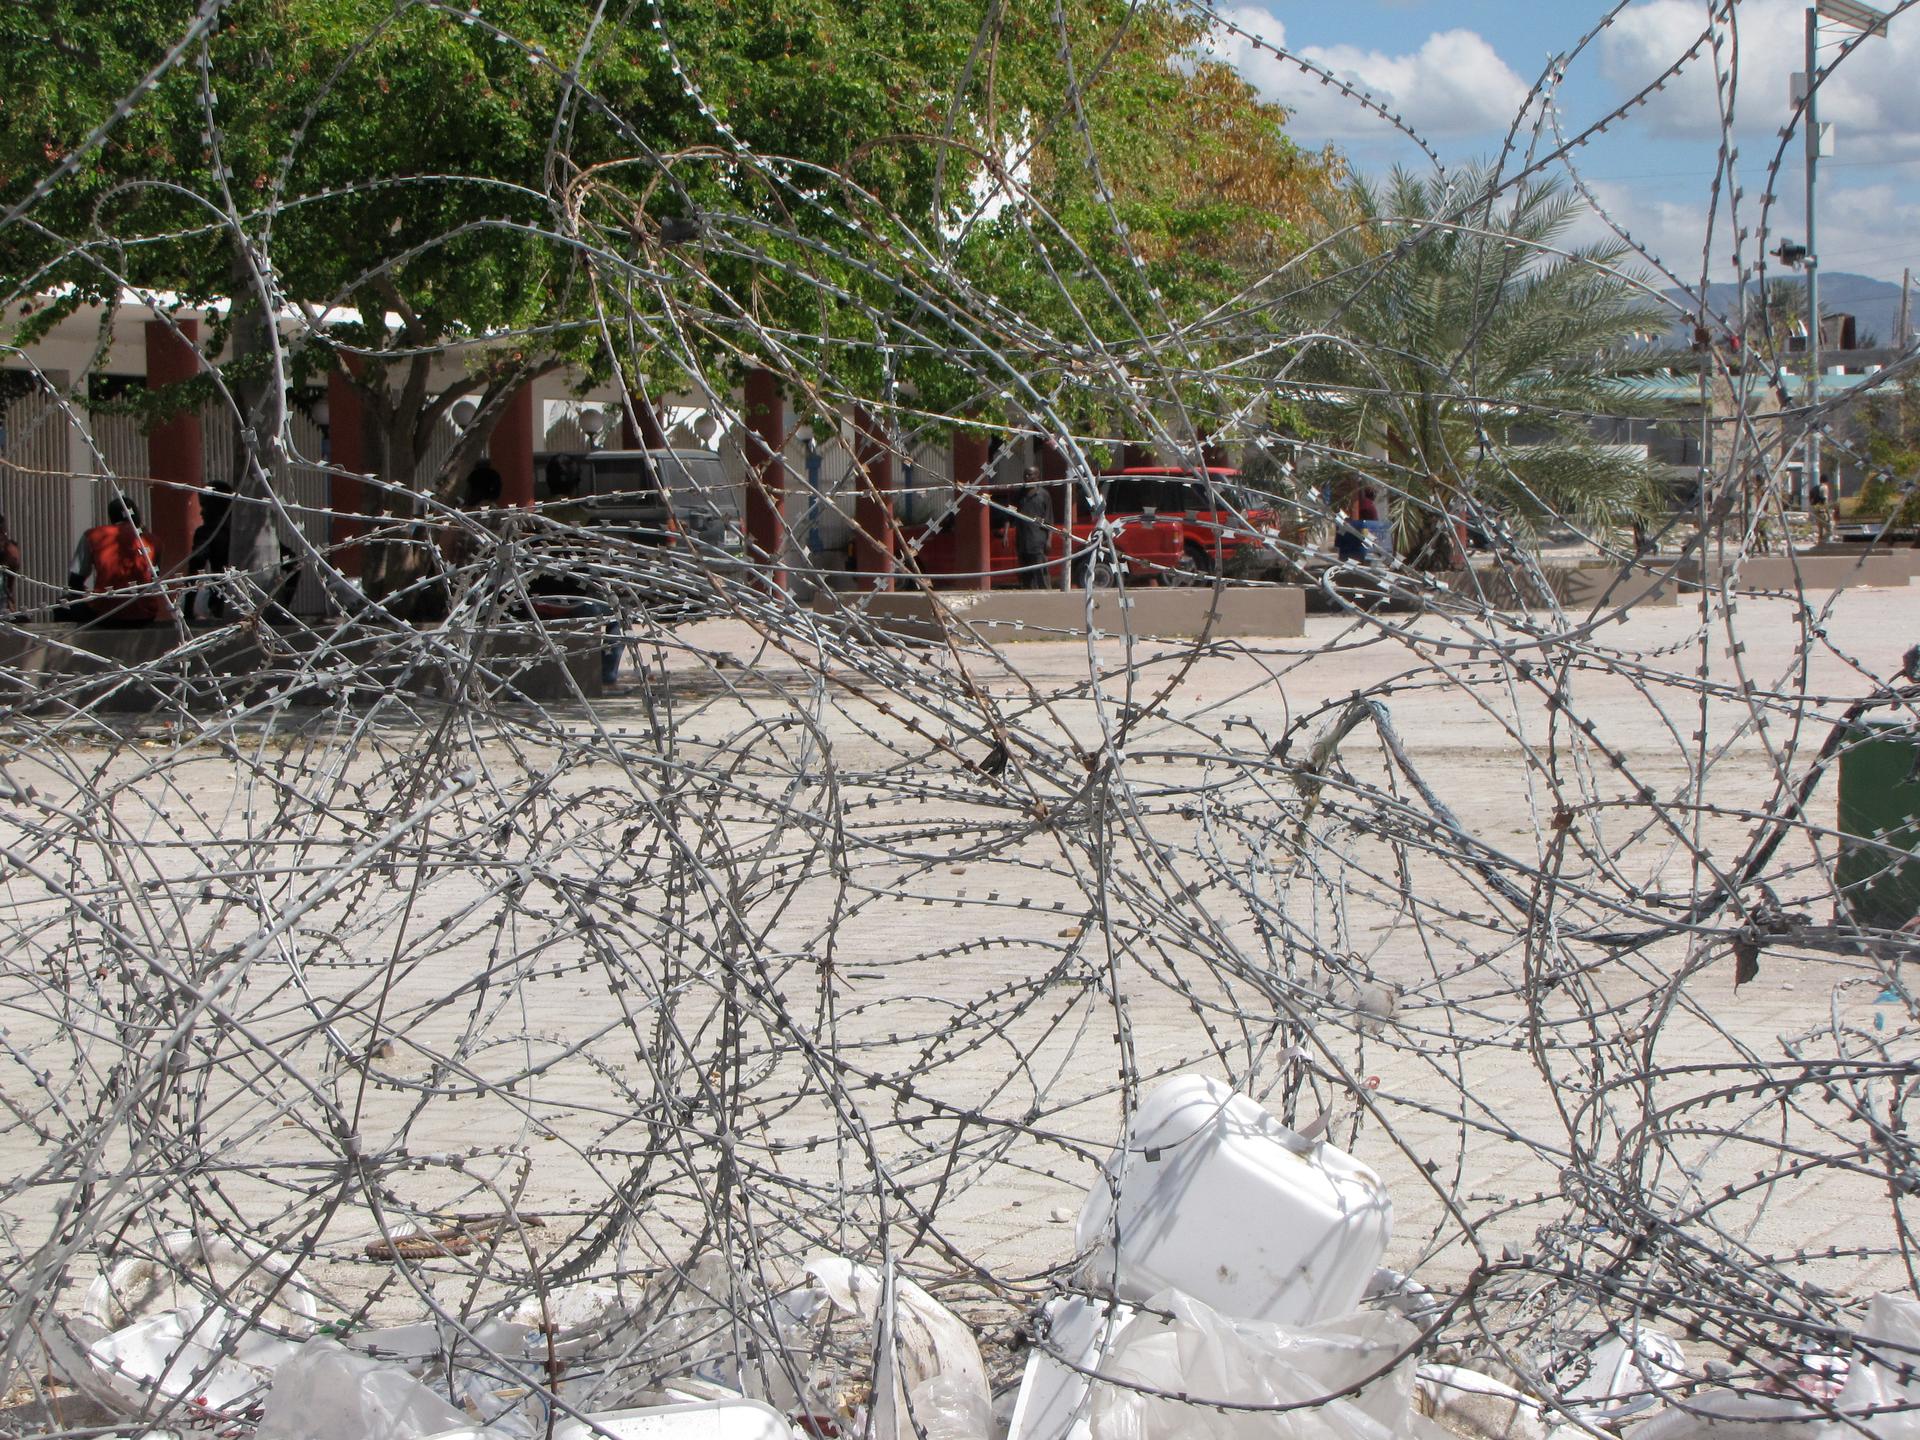 Behind this tangle of barbed wire in the Place d'Armes in Gonaives, a boy was sexually assaulted by UN peacekeepers, according to a UN investigation.